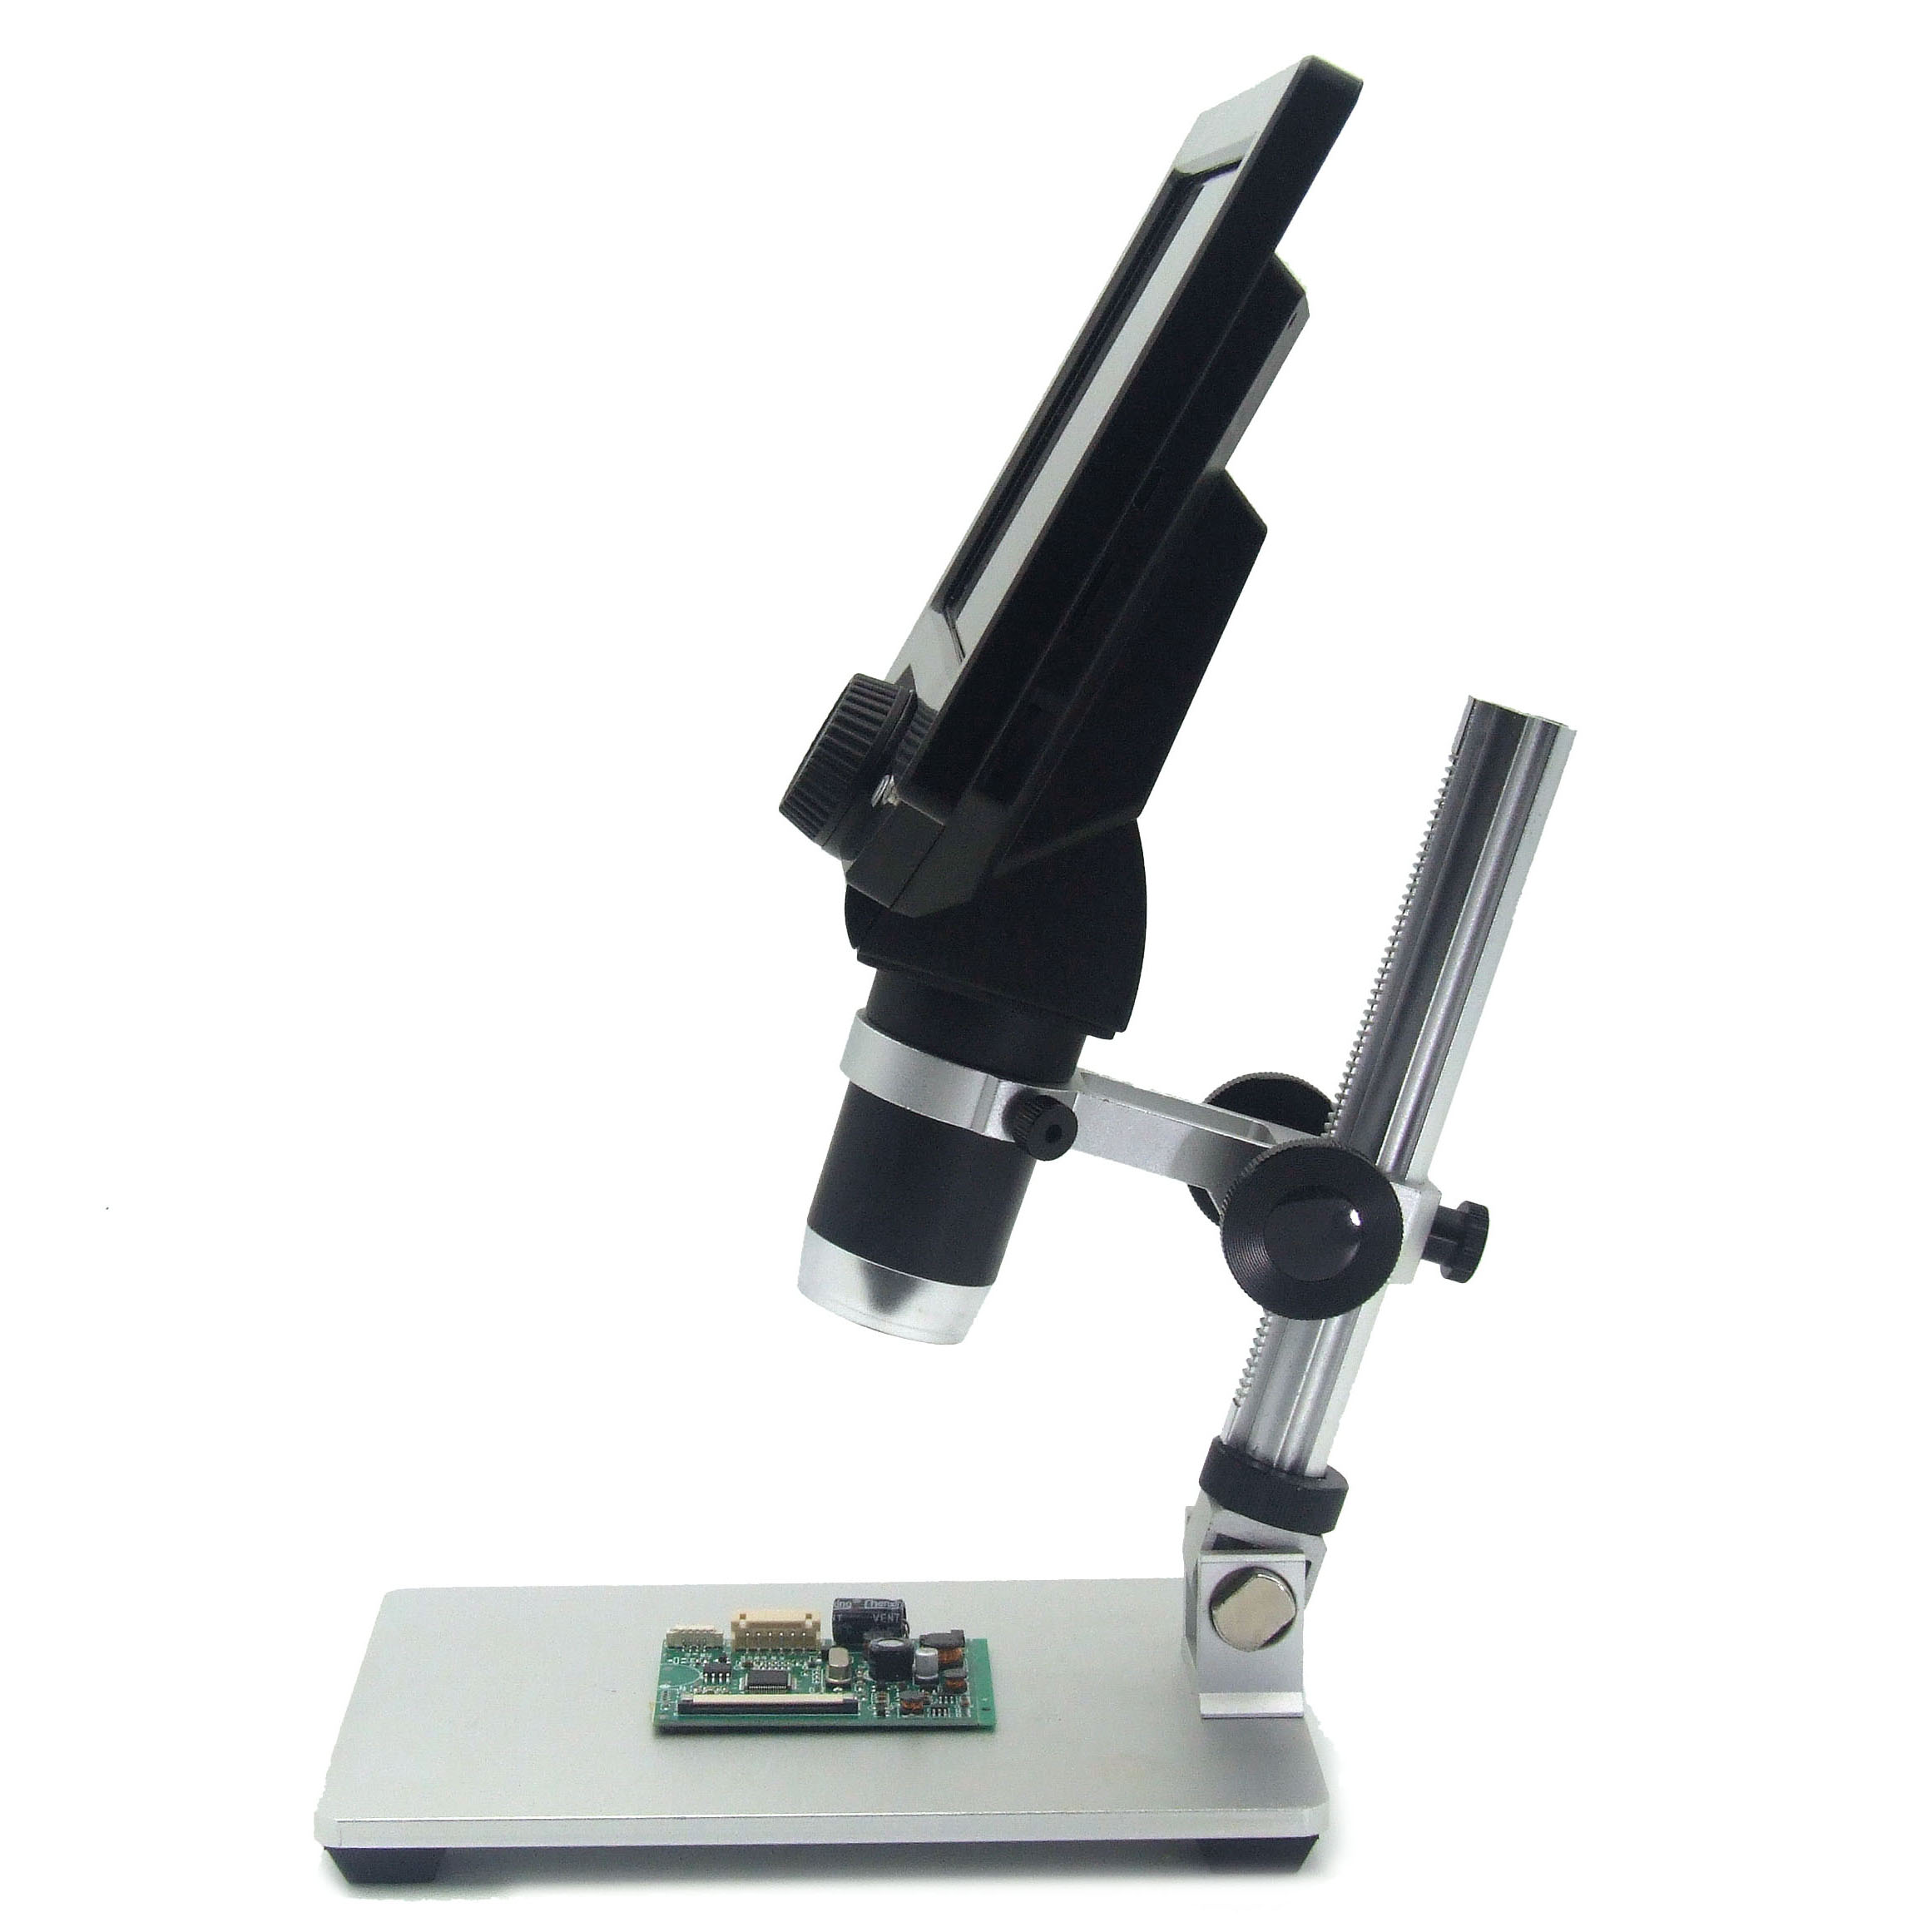 1200X 12MP HD 7" LCD Display USB Electronic Microscope Zoom Video Microscope VGA Magnifying Camera For Phone PCB DIY Soldering